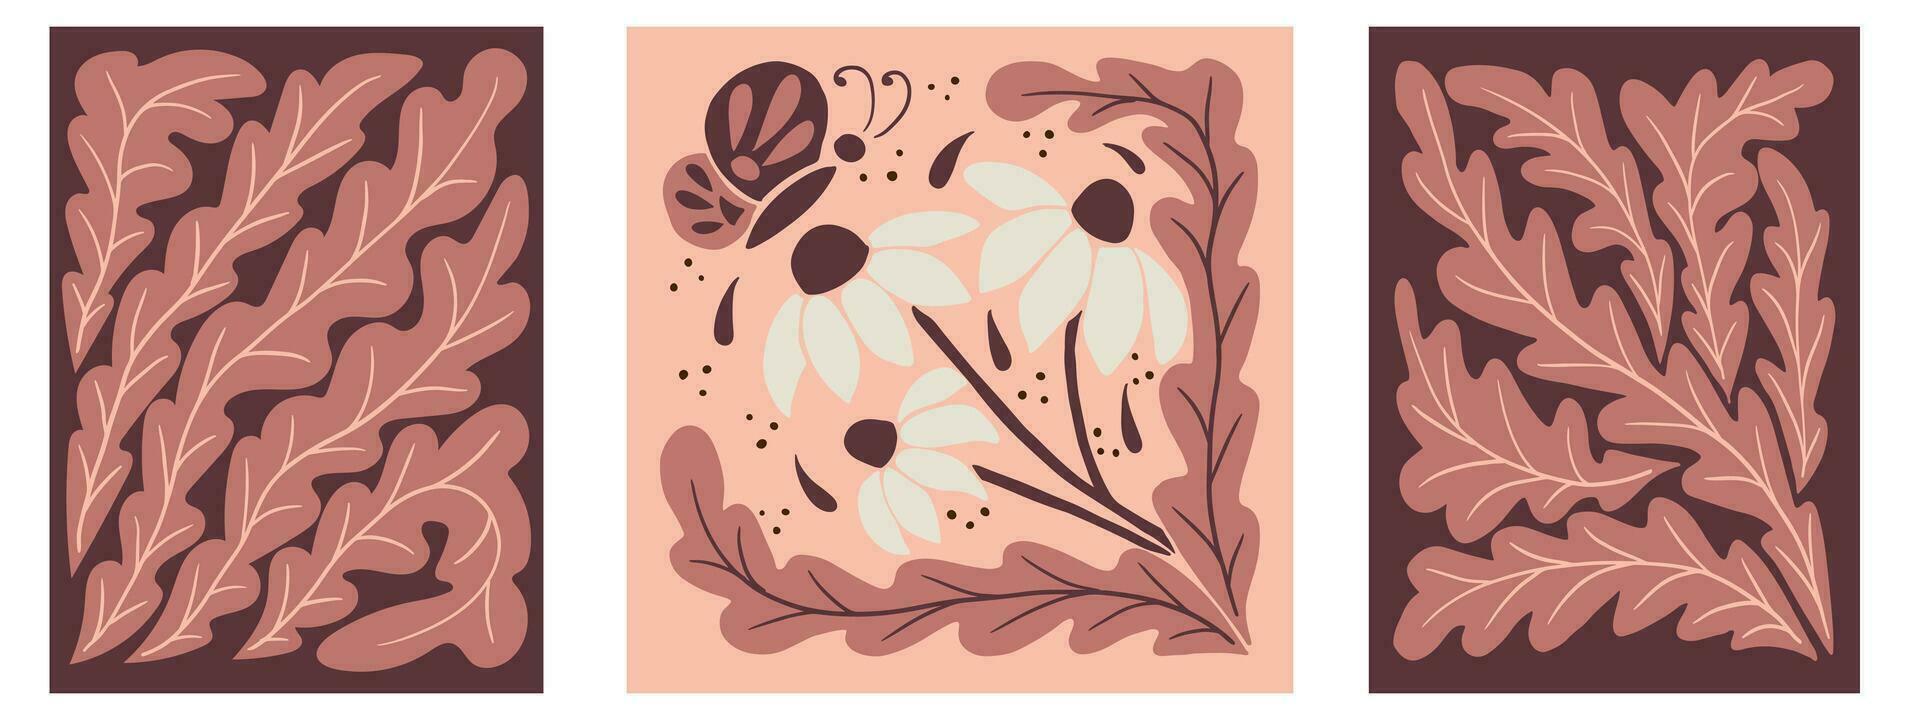 Abstarct floral groovy minimalistic compositions. Collection of vetor botanical graphic posters in flat style. Vintage trendy design Suitable for interior decoration, home design, t shirt print vector